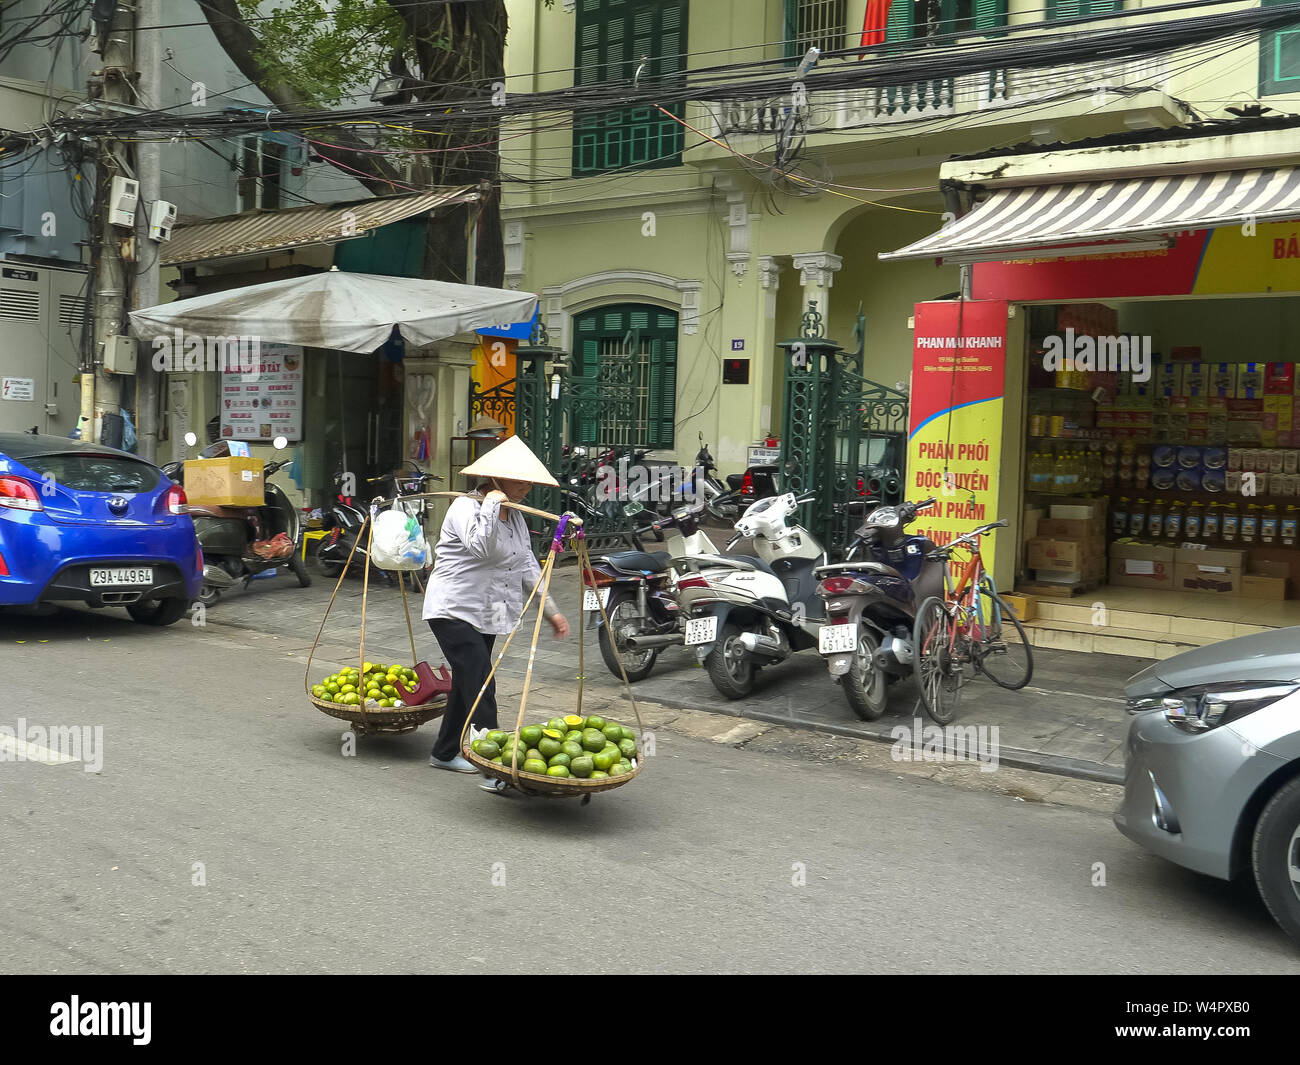 HANOI, VIETNAM - JUNE 28, 2017: a woman carrying fruit using a shoulder pole and two baskets along a street in hanoi Stock Photo